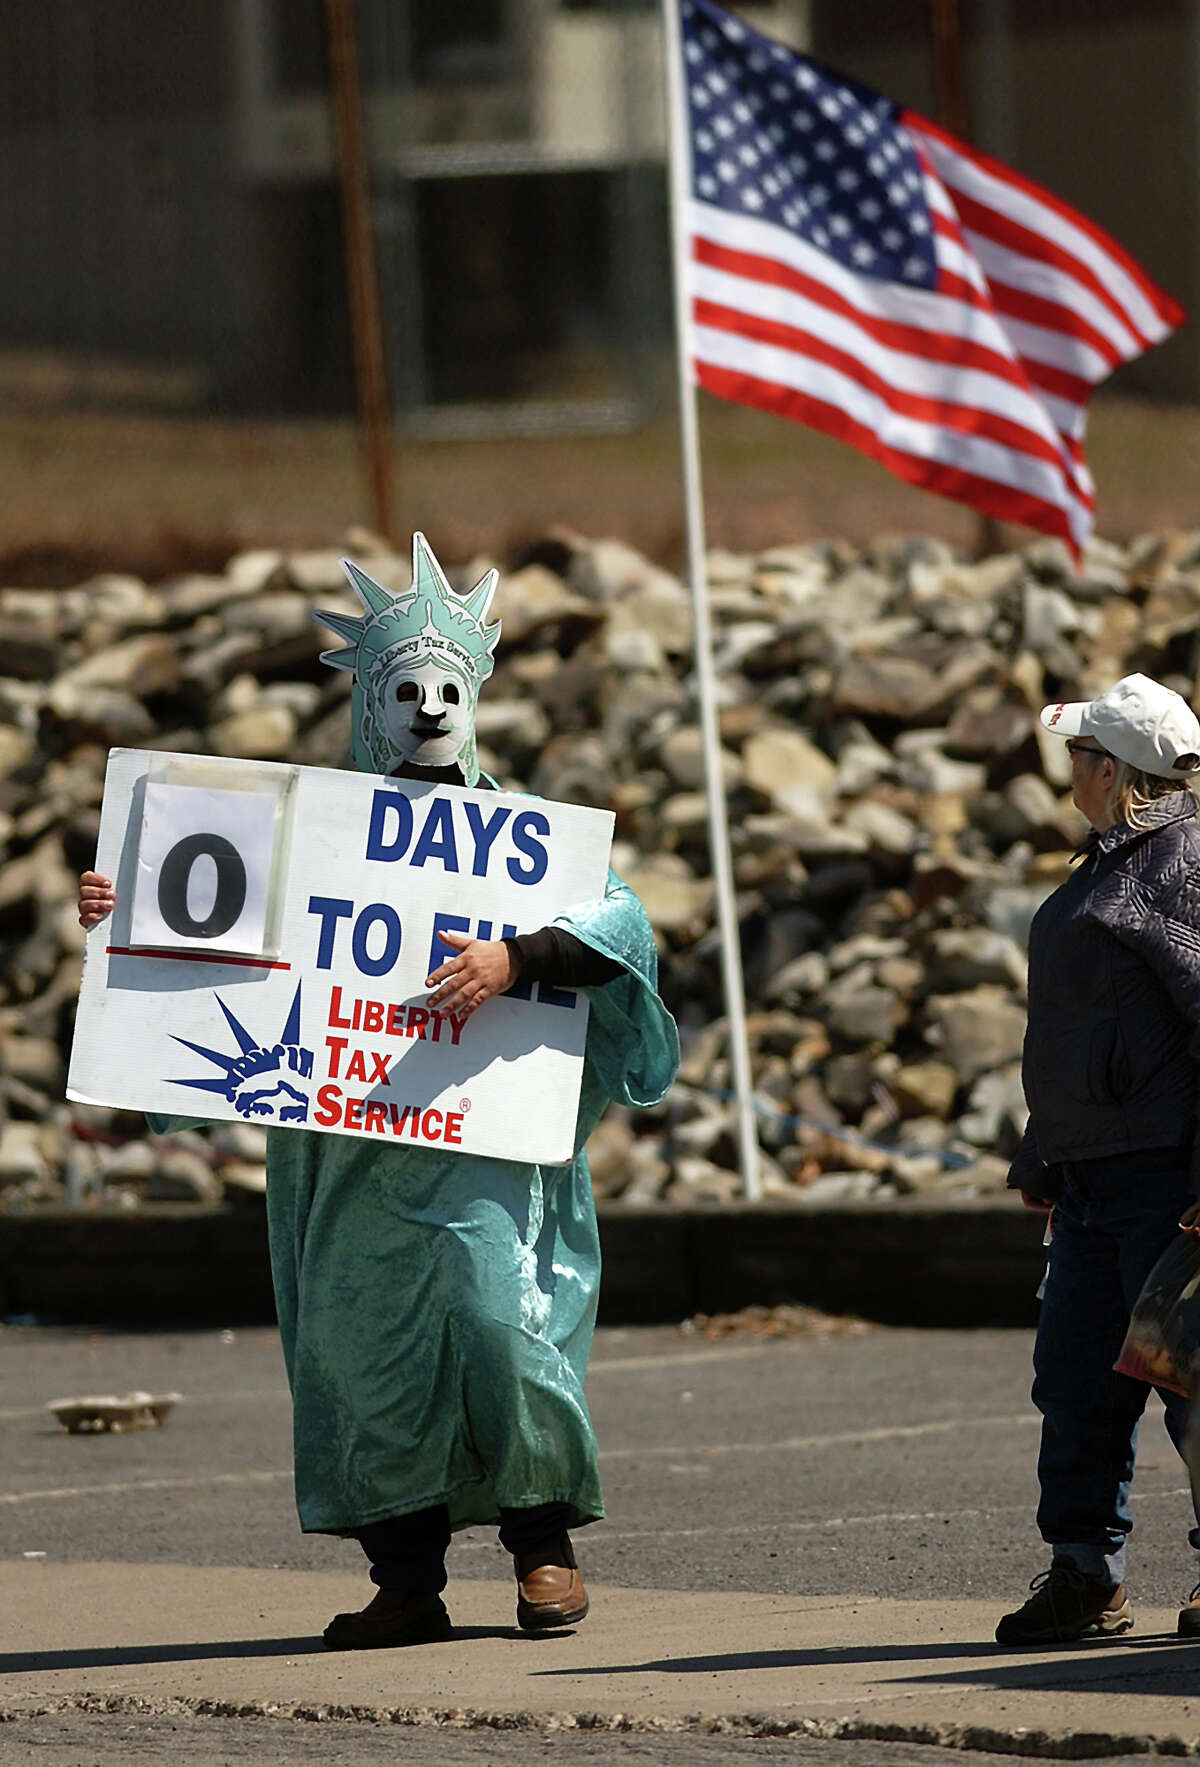 Dressed as The Statue of Liberty, Philip Luongo of Scranton, Pa. waves to passing motorists on S. Webster Avenue in Scranton, Pennsylvania on Monday, April 15, 2013. Monday was the last day for Americans to file their tax forms. (AP photo / The Scranton Times-Tribune, Butch Comegys) (AP Photo/Scranton Times & Tribune, ) WILKES BARRE TIMES-LEADER OUT; MANDATORY CREDIT